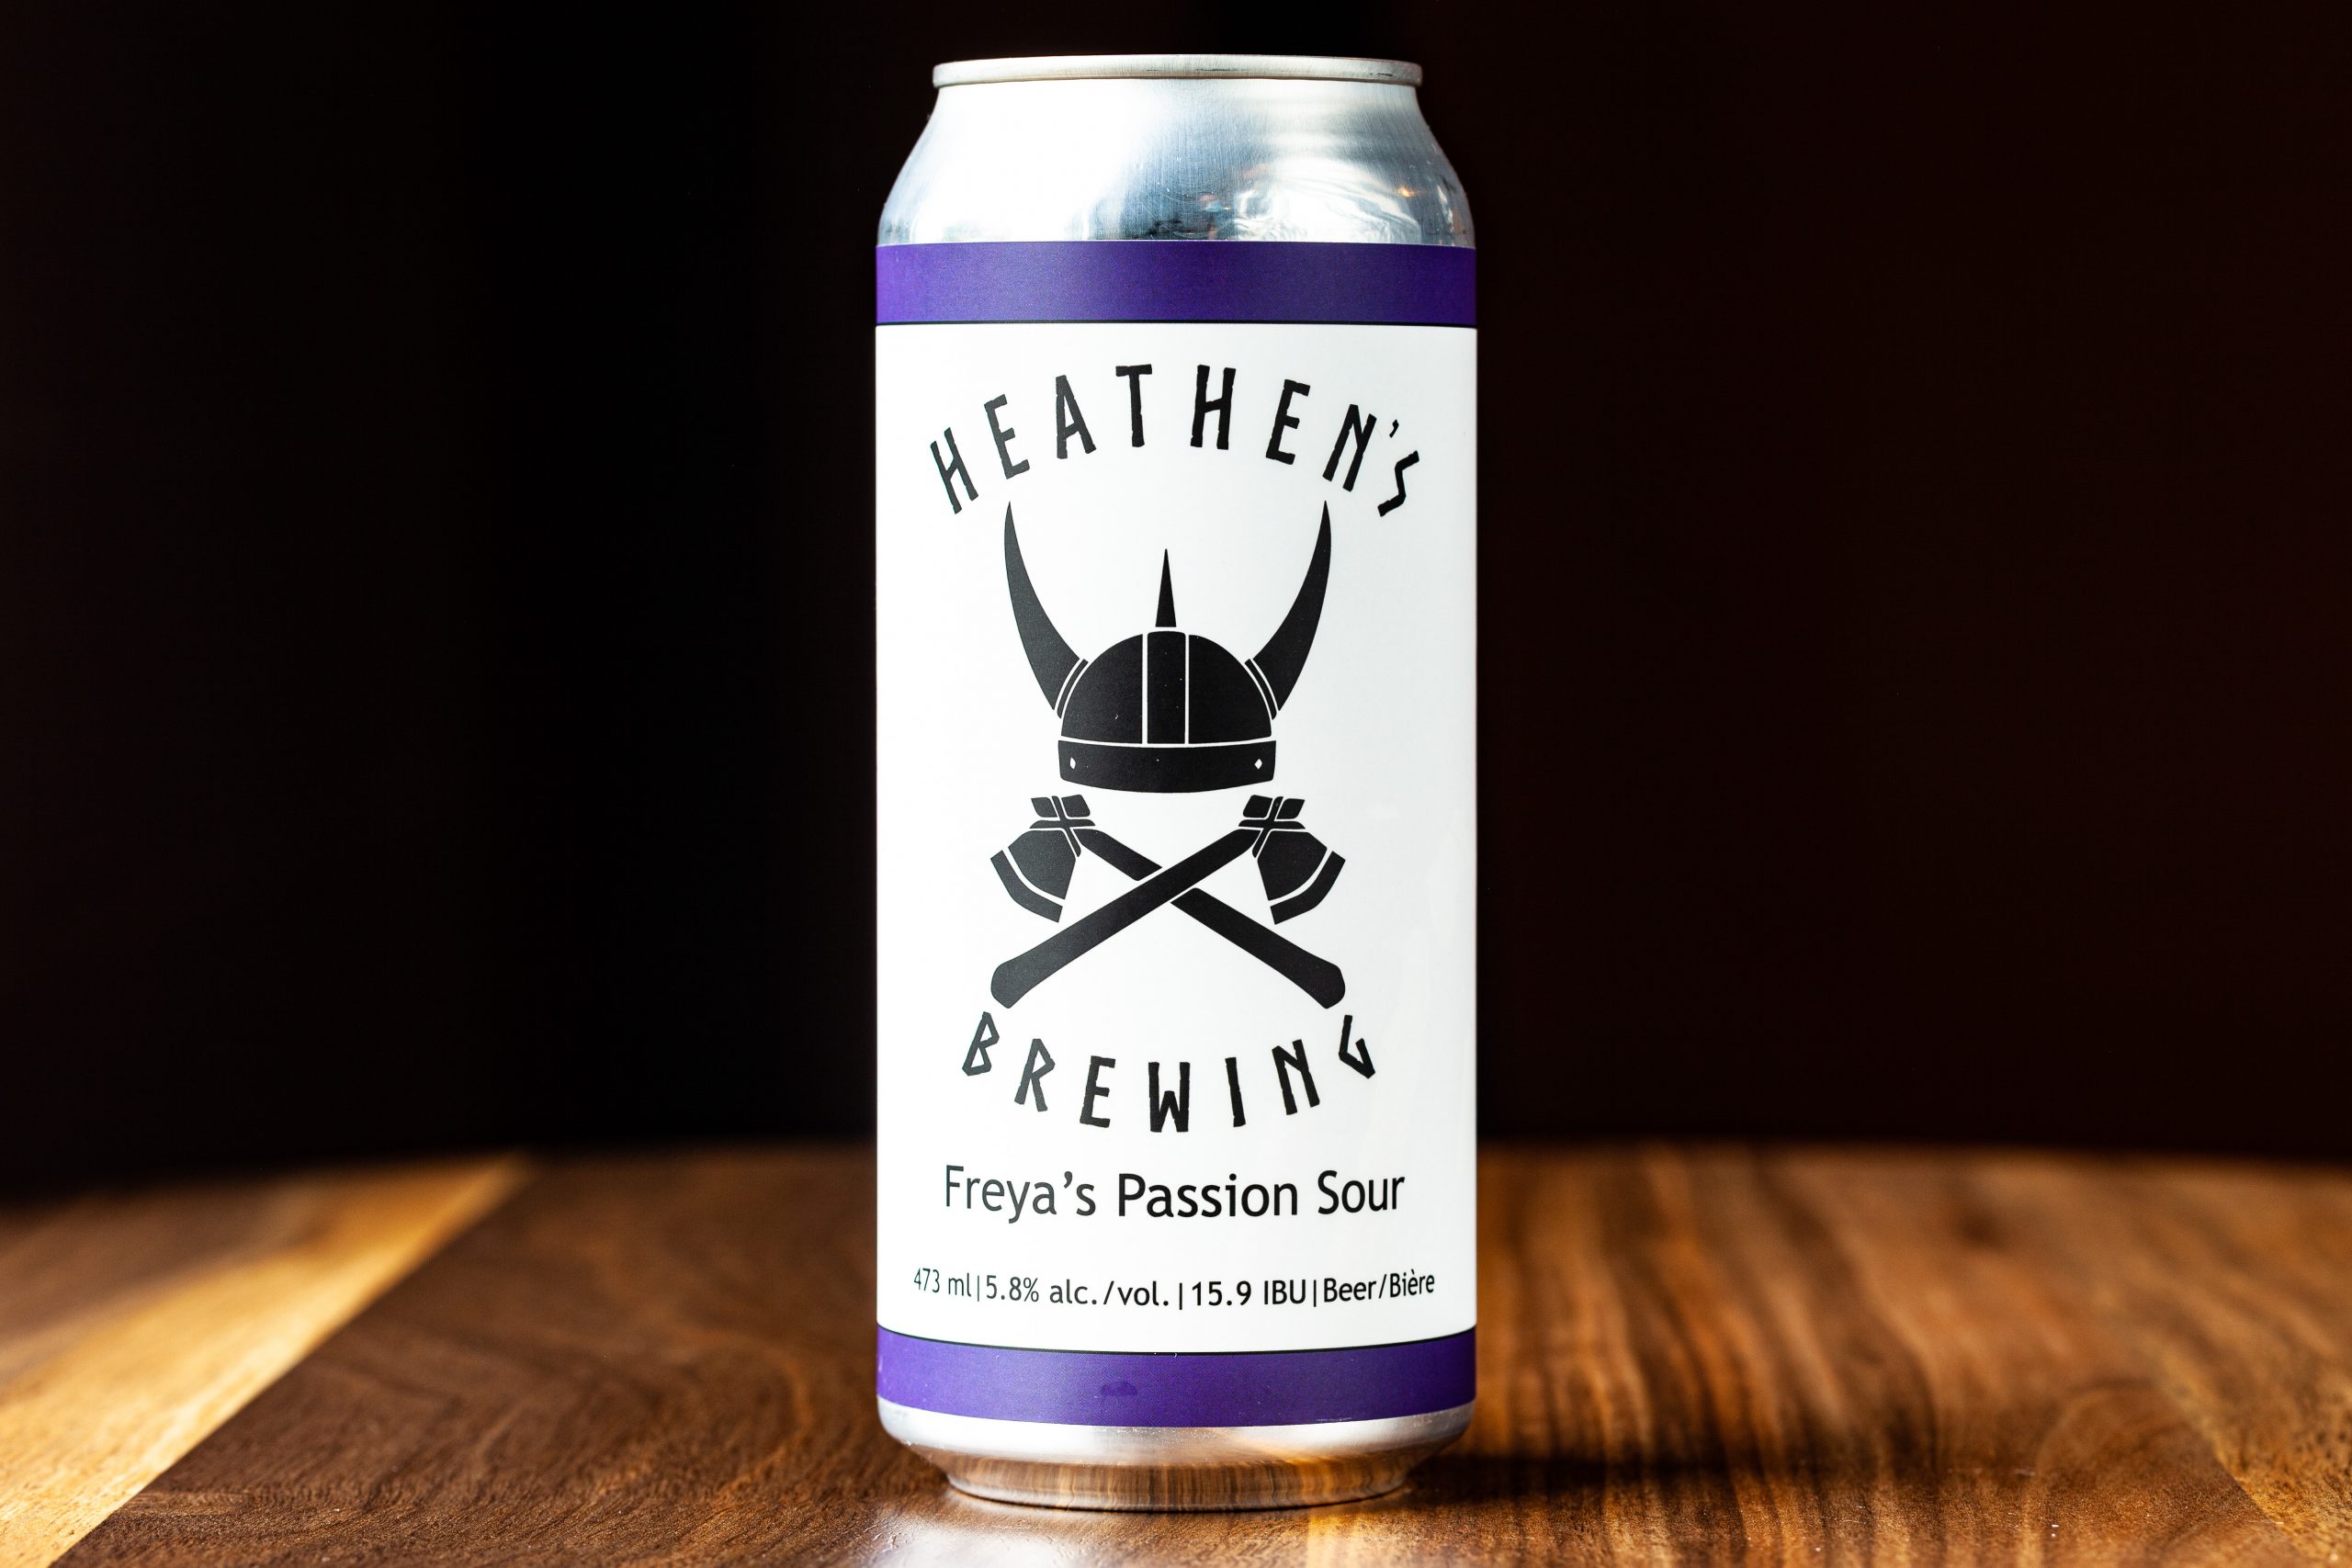 A 473-mL can of Heathen's Brewing Freya's Passion Sour gluten free beer.